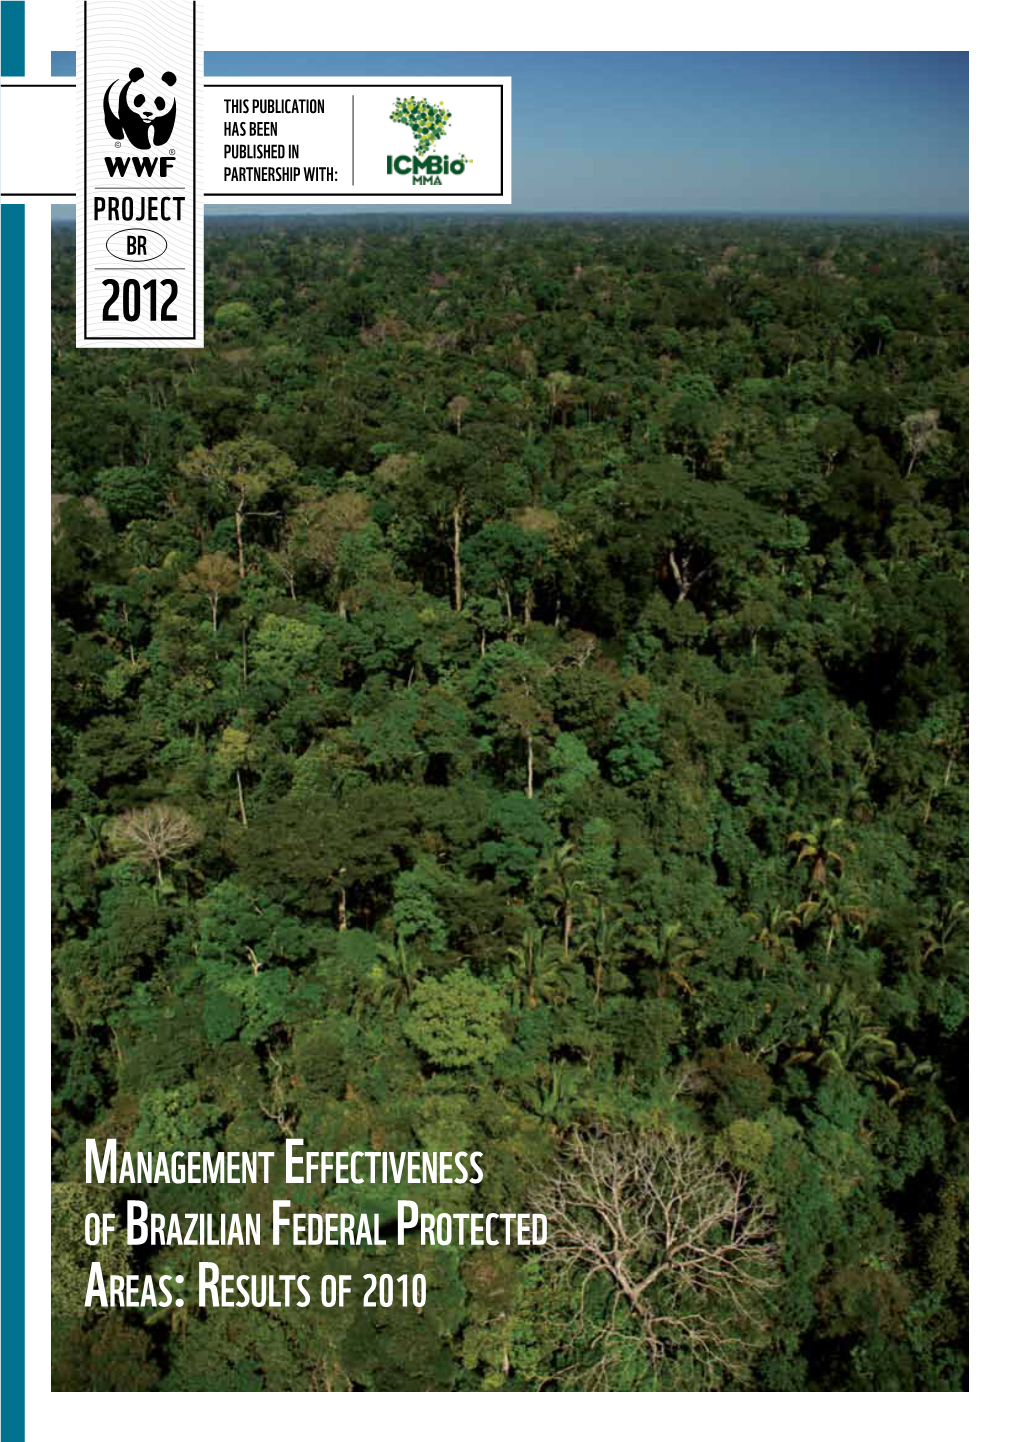 Management Effectiveness of Brazilian Federal Protected Areas: Results of 2010